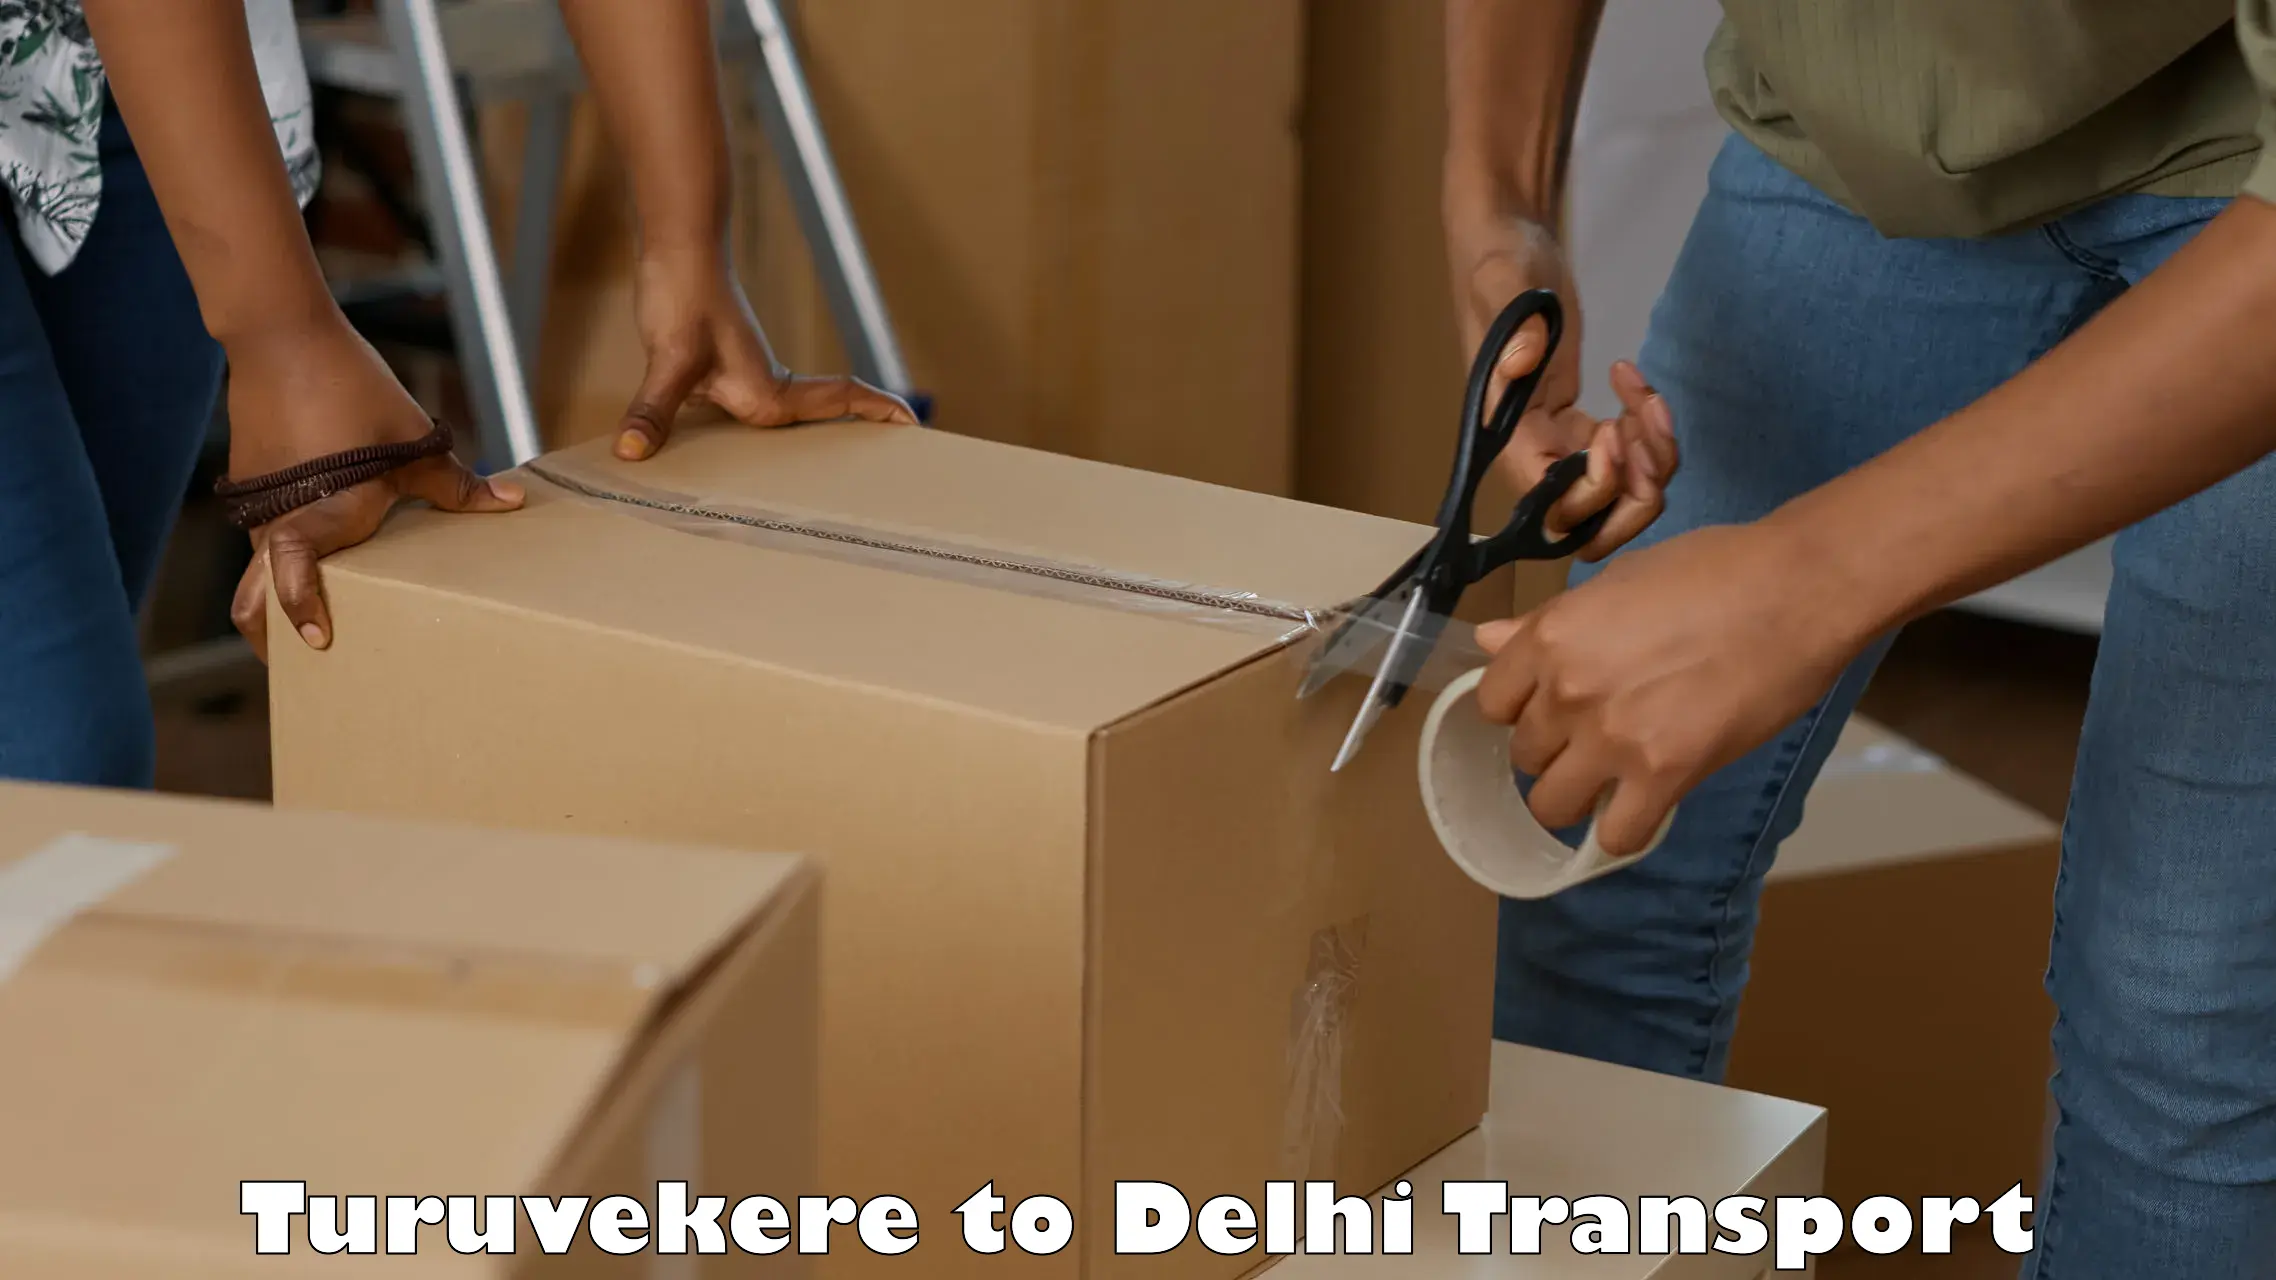 Container transport service Turuvekere to University of Delhi